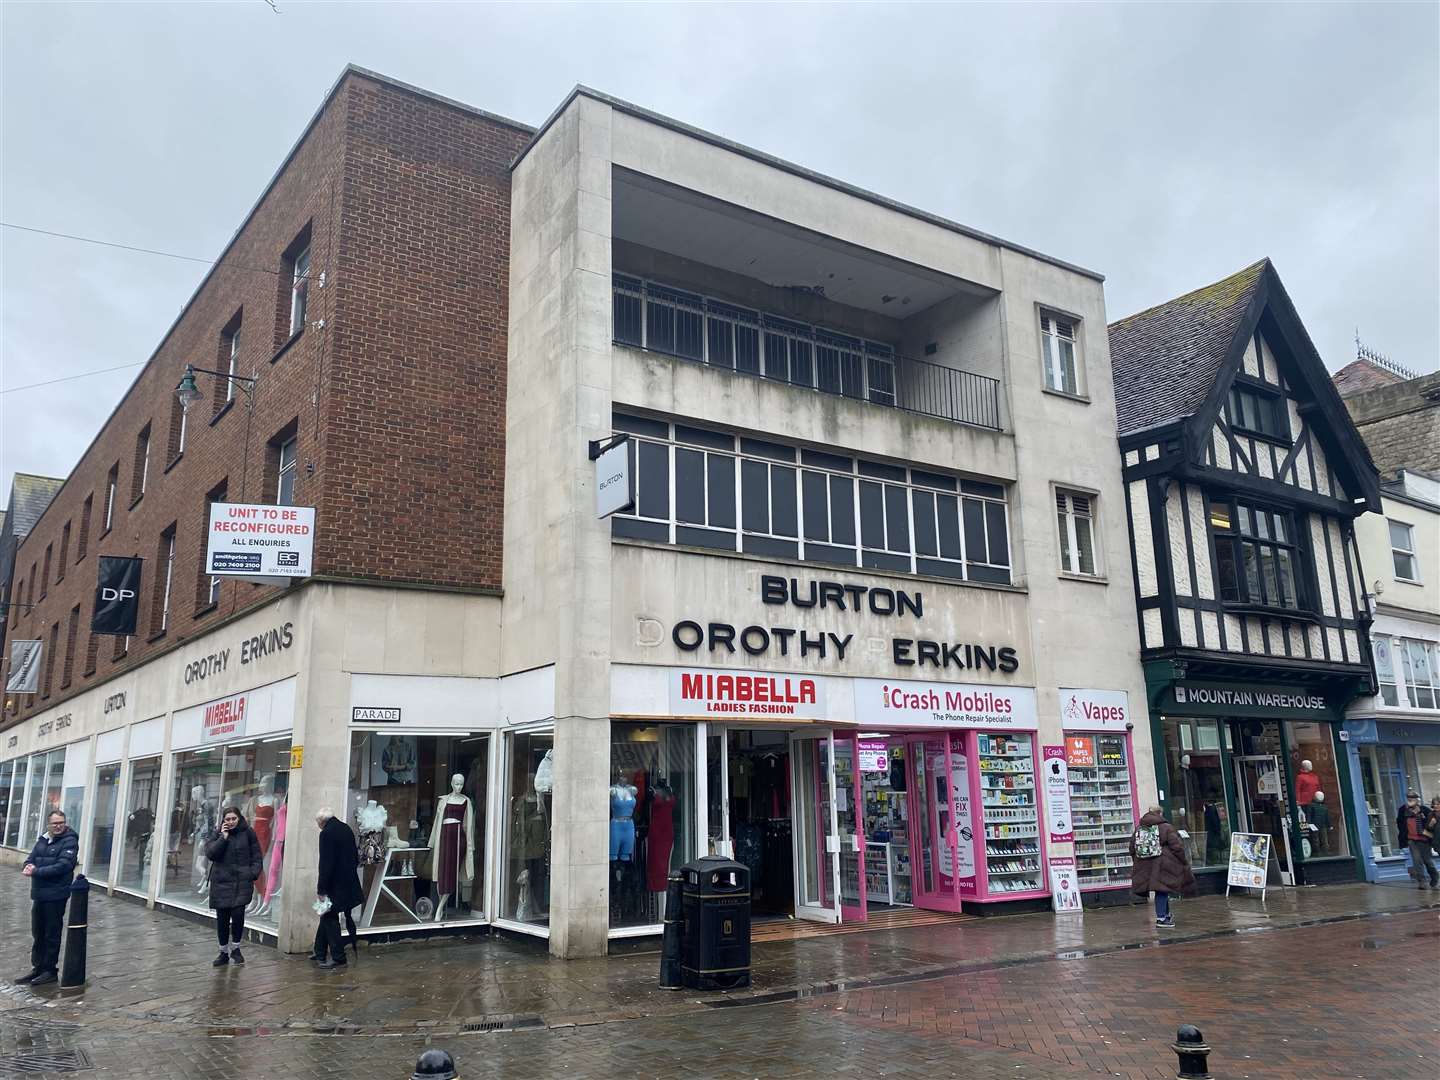 Plans to convert a long-neglected building - formerly the home of Burton and Dorothy Perkins - into a three-storey rooftop restaurant have been revealed